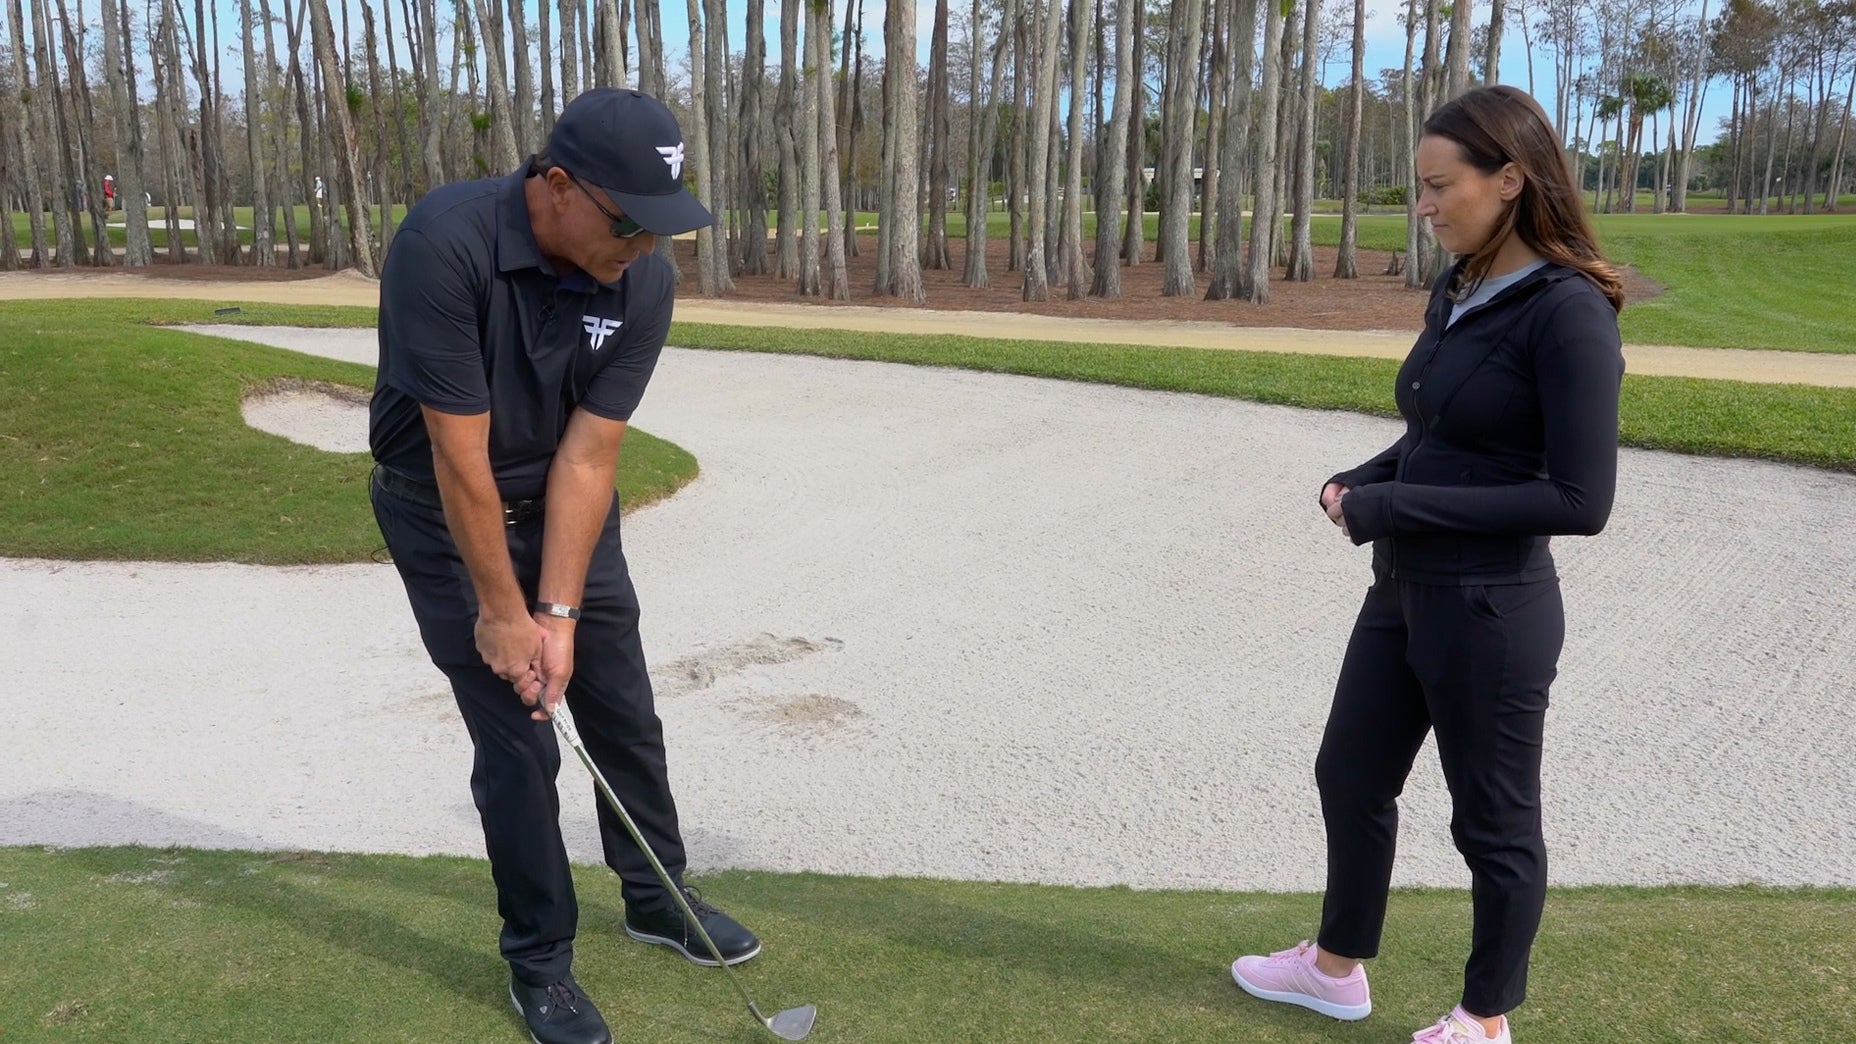 Phil Mickelson talks to GOLF's Claire Rogers about the most common chipping mistakes amateurs make, and offers some tips to fix them